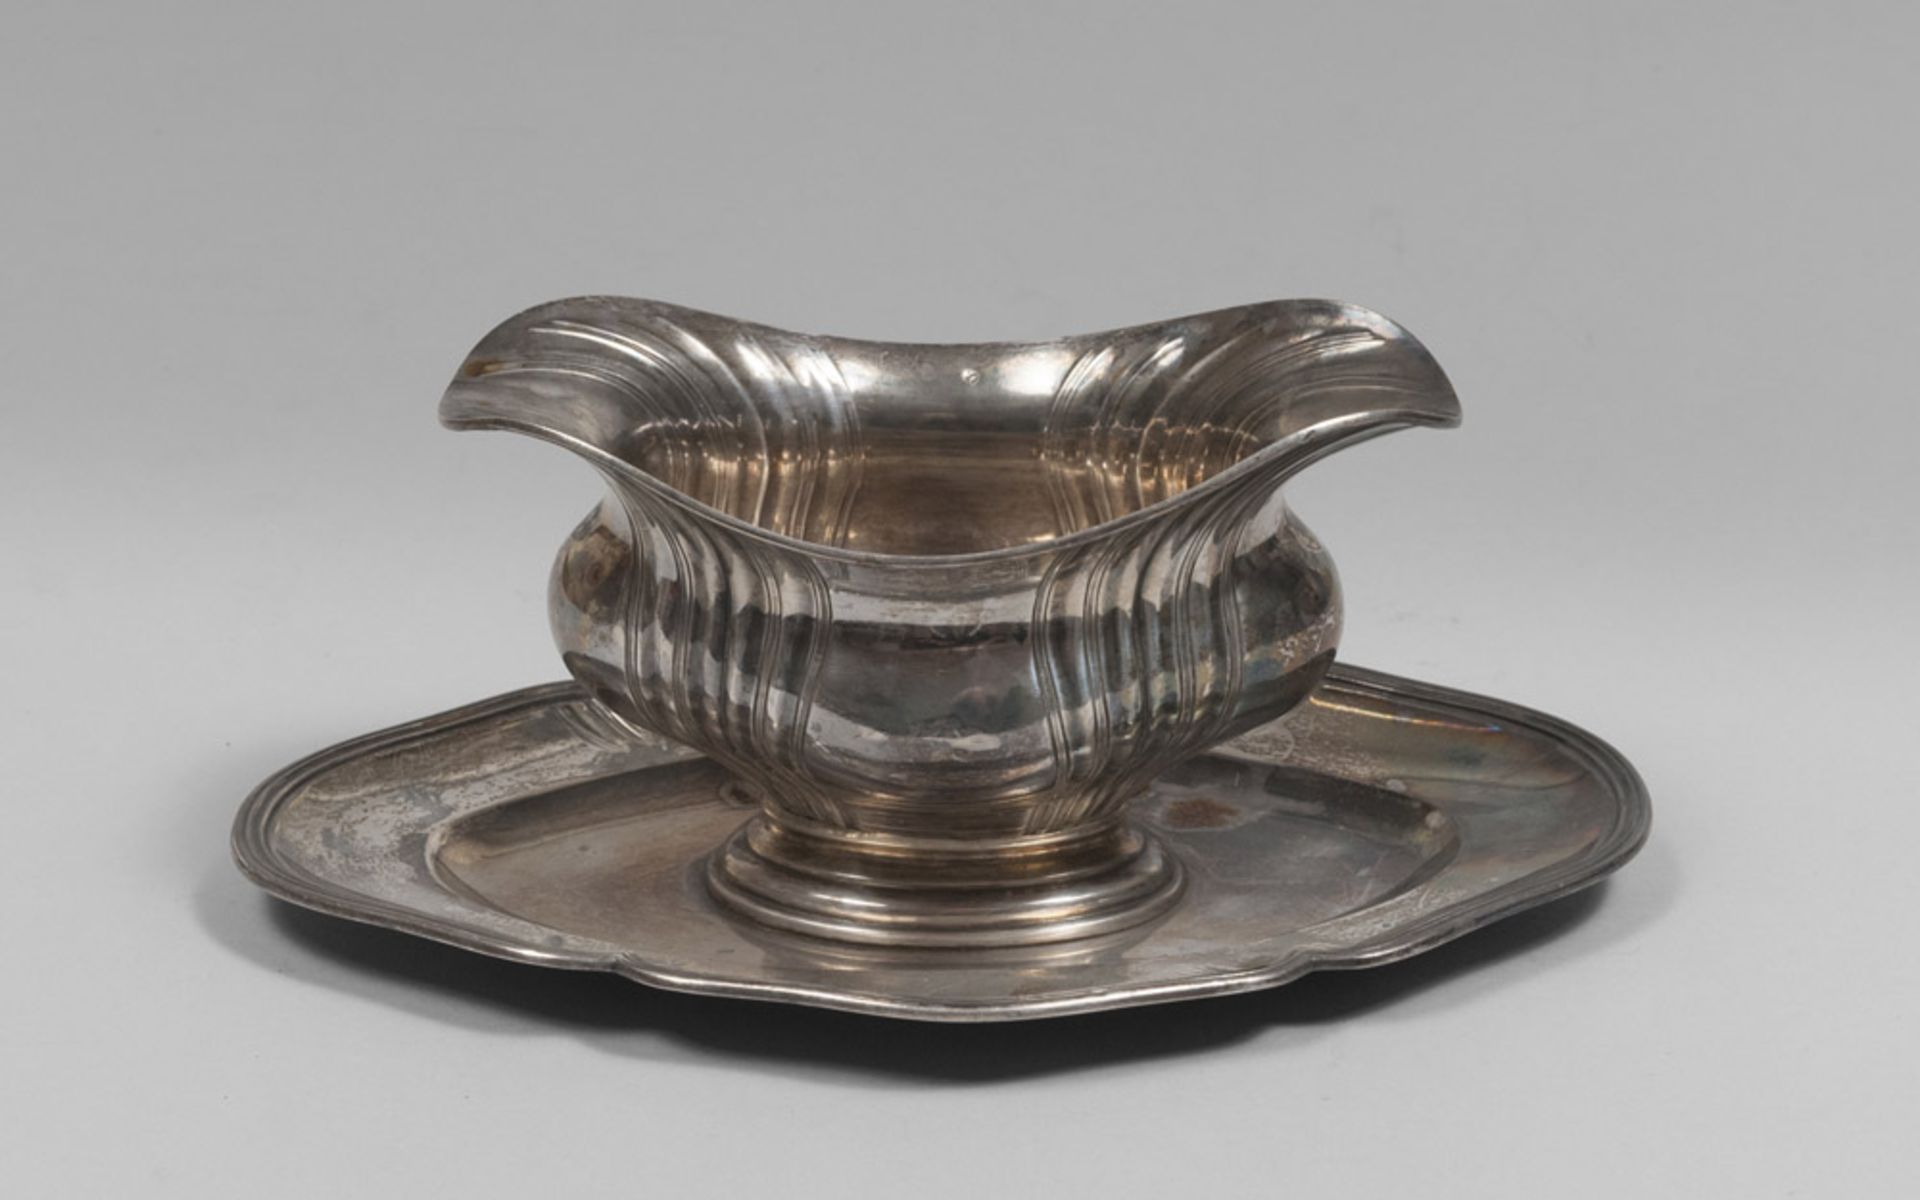 Silver sauce-boat, Punch France for export 19th century. Title 800/1000. Measures cm. 11 x 18 x